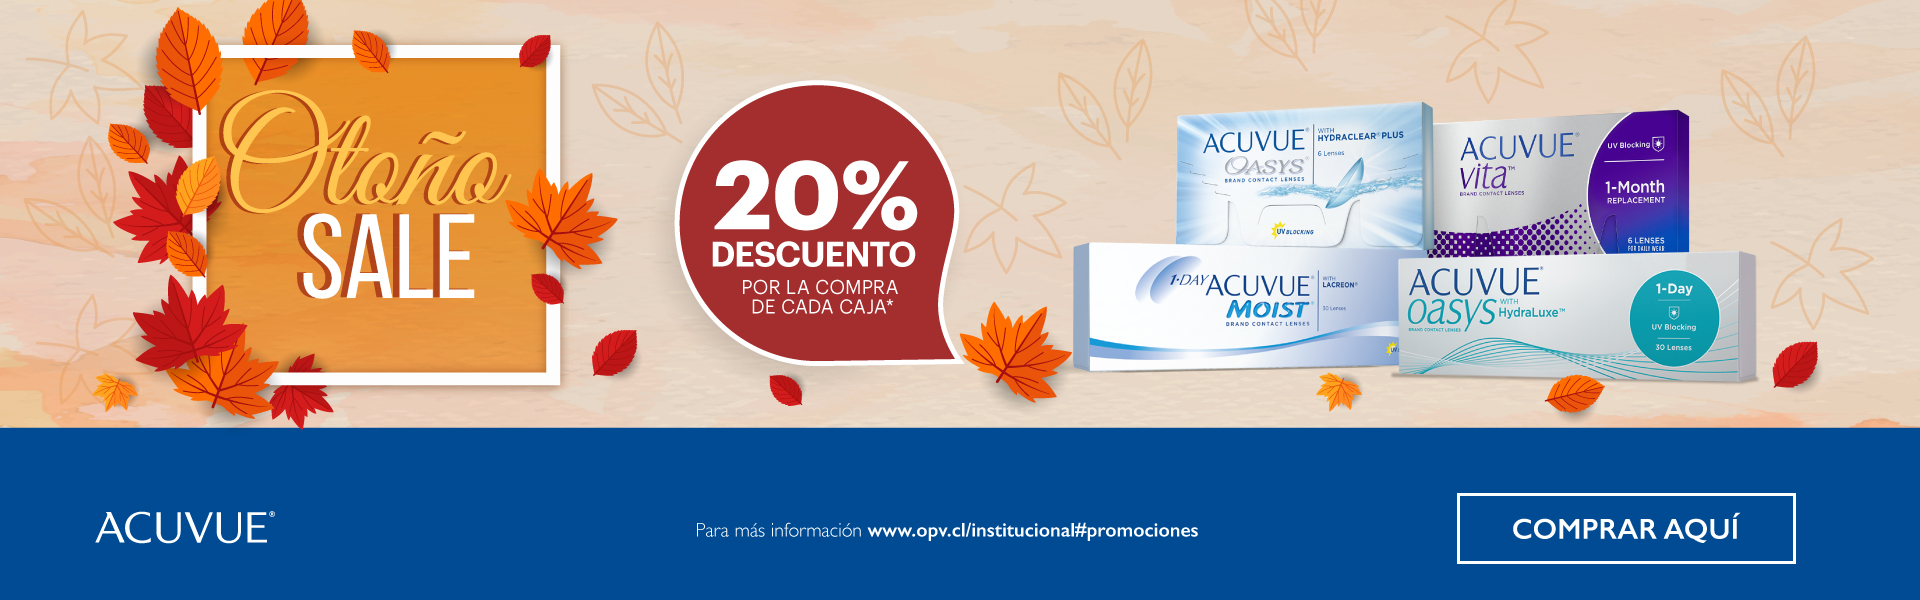 1-Acuvue